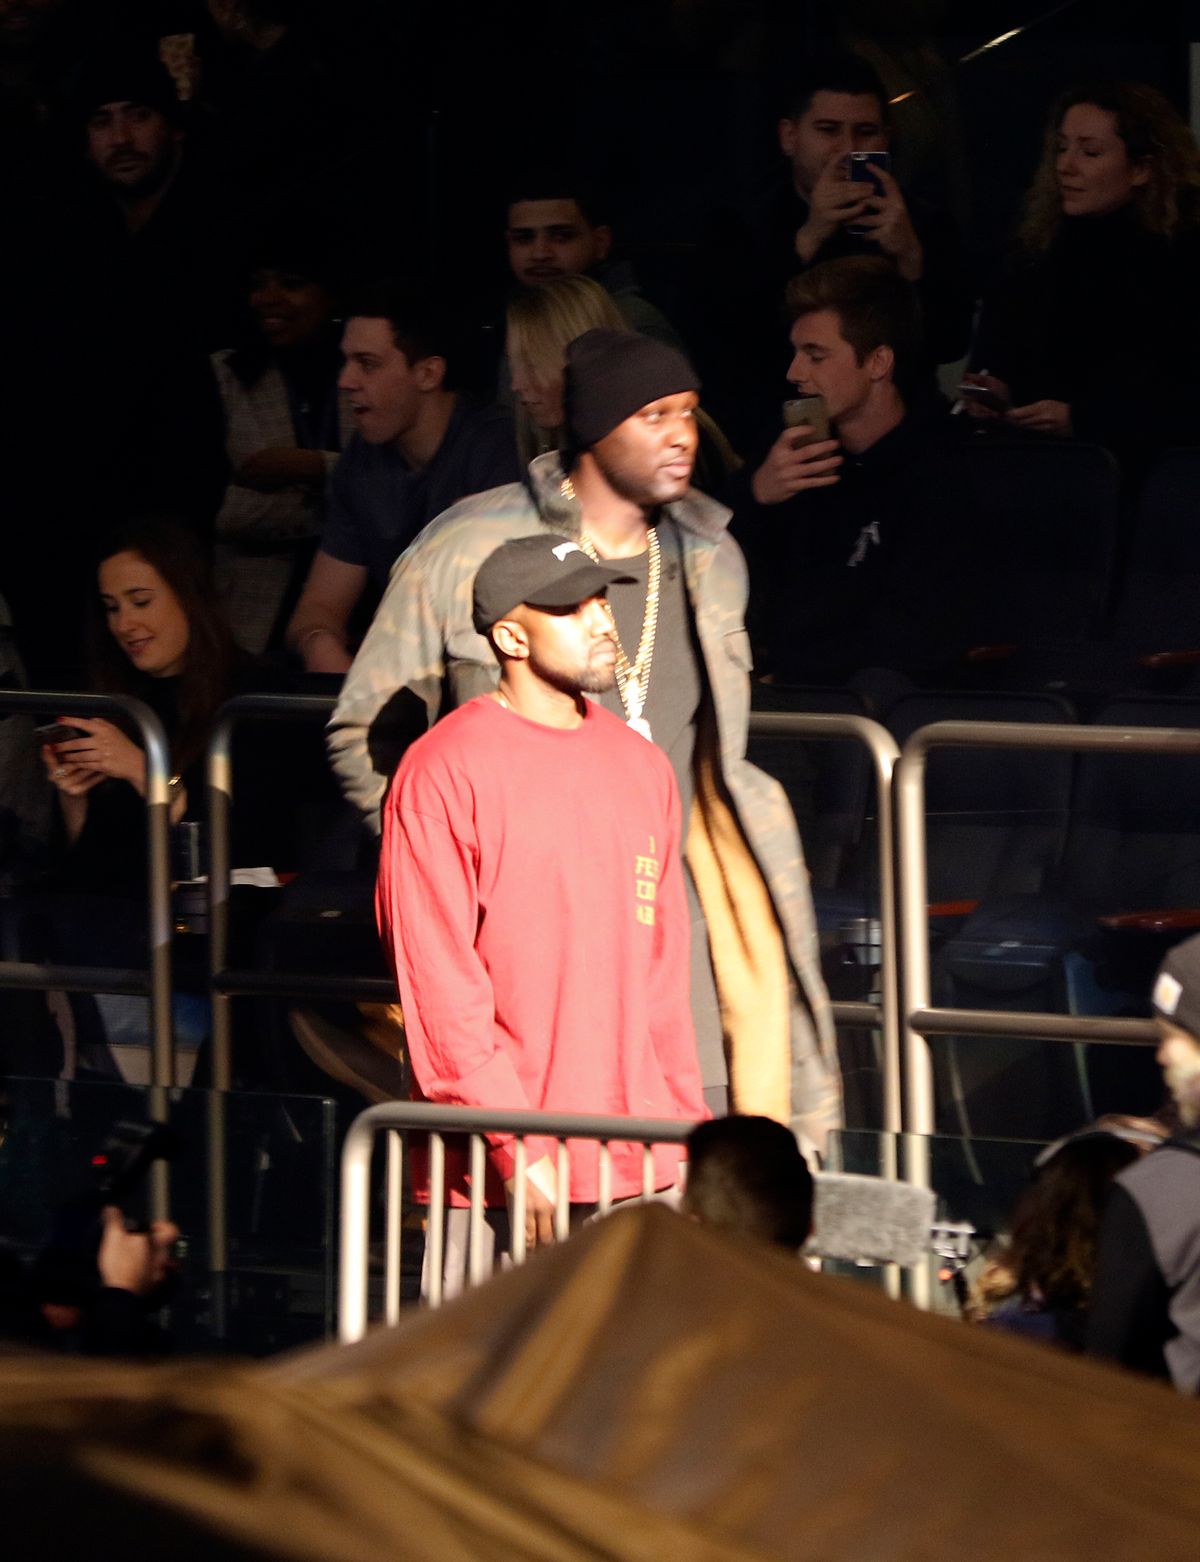 Lamar Odom, background, and Kanye West enter Madison Square Garden for the unveiling of the Yeezy collection and album release for West's latest album, "The Life of Pablo," Thursday, Feb. 11, 2016 during Fashion Week in New York. (AP Photo/Bruce Barton) (AP)